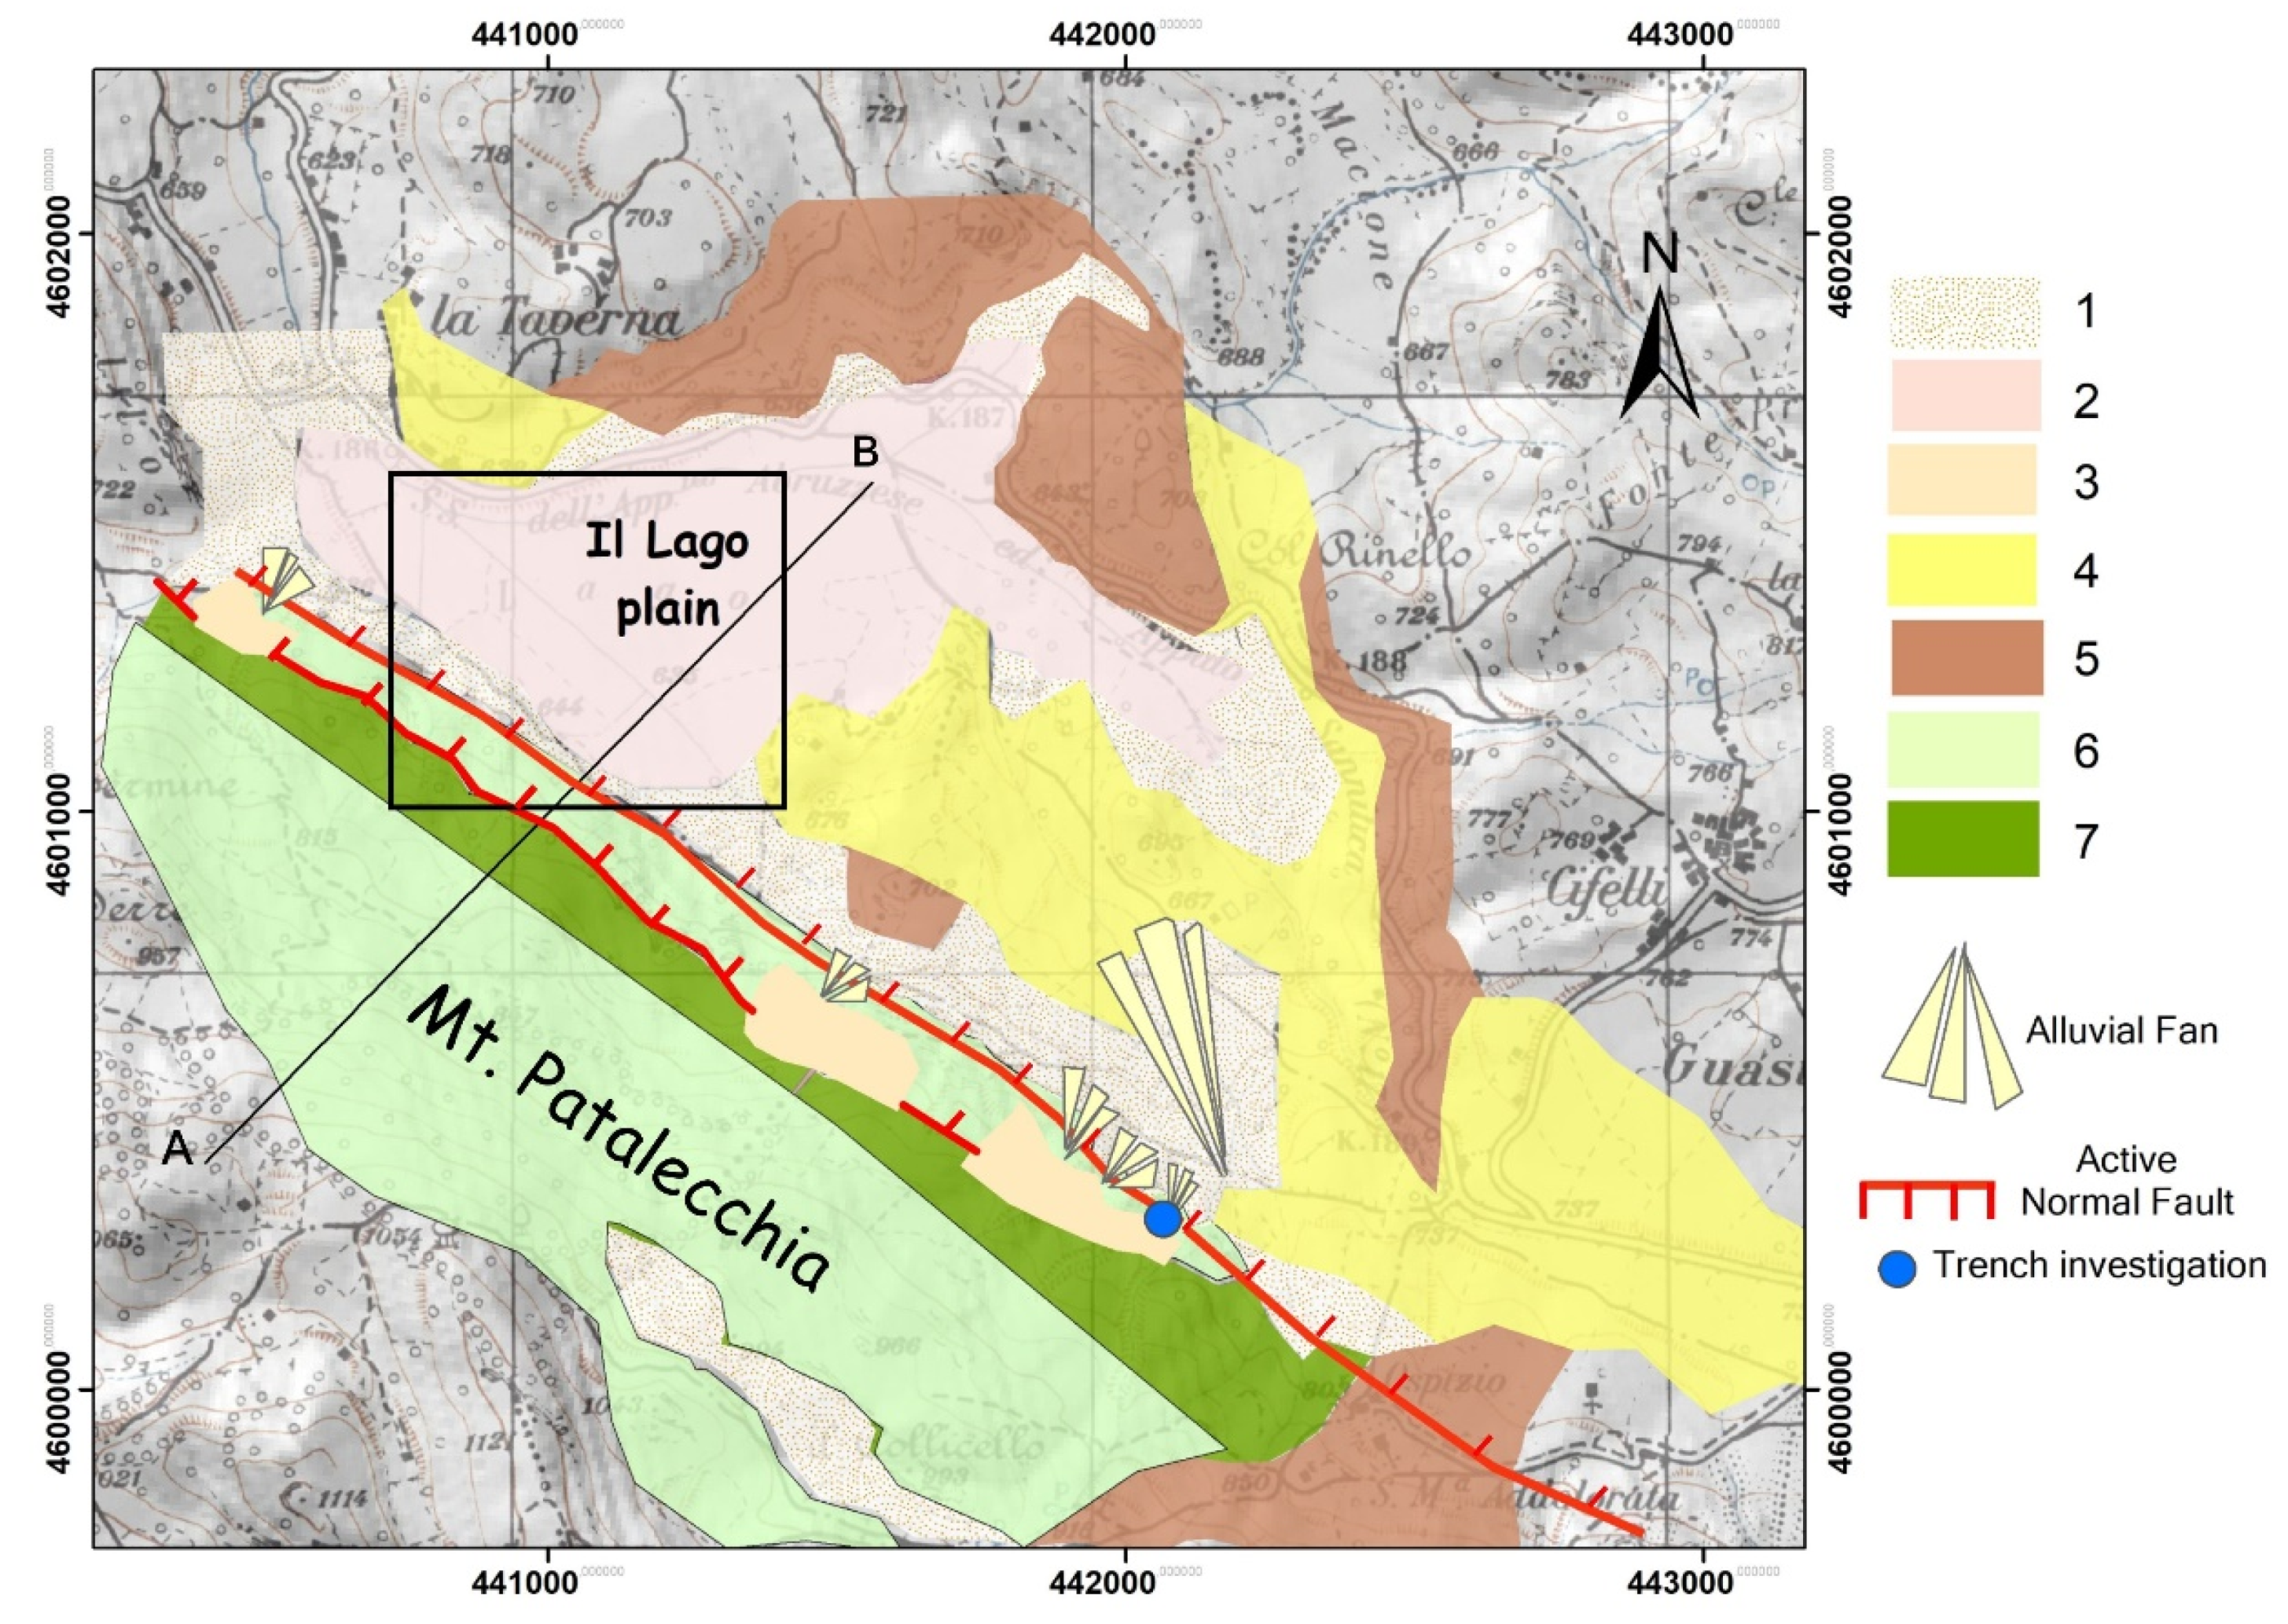 Remote Sensing | Free Full-Text | Joint Interpretation of Geophysical  Results and Geological Observations for Detecting Buried Active Faults: The  Case of the “Il Lago” Plain (Pettoranello del Molise, Italy)